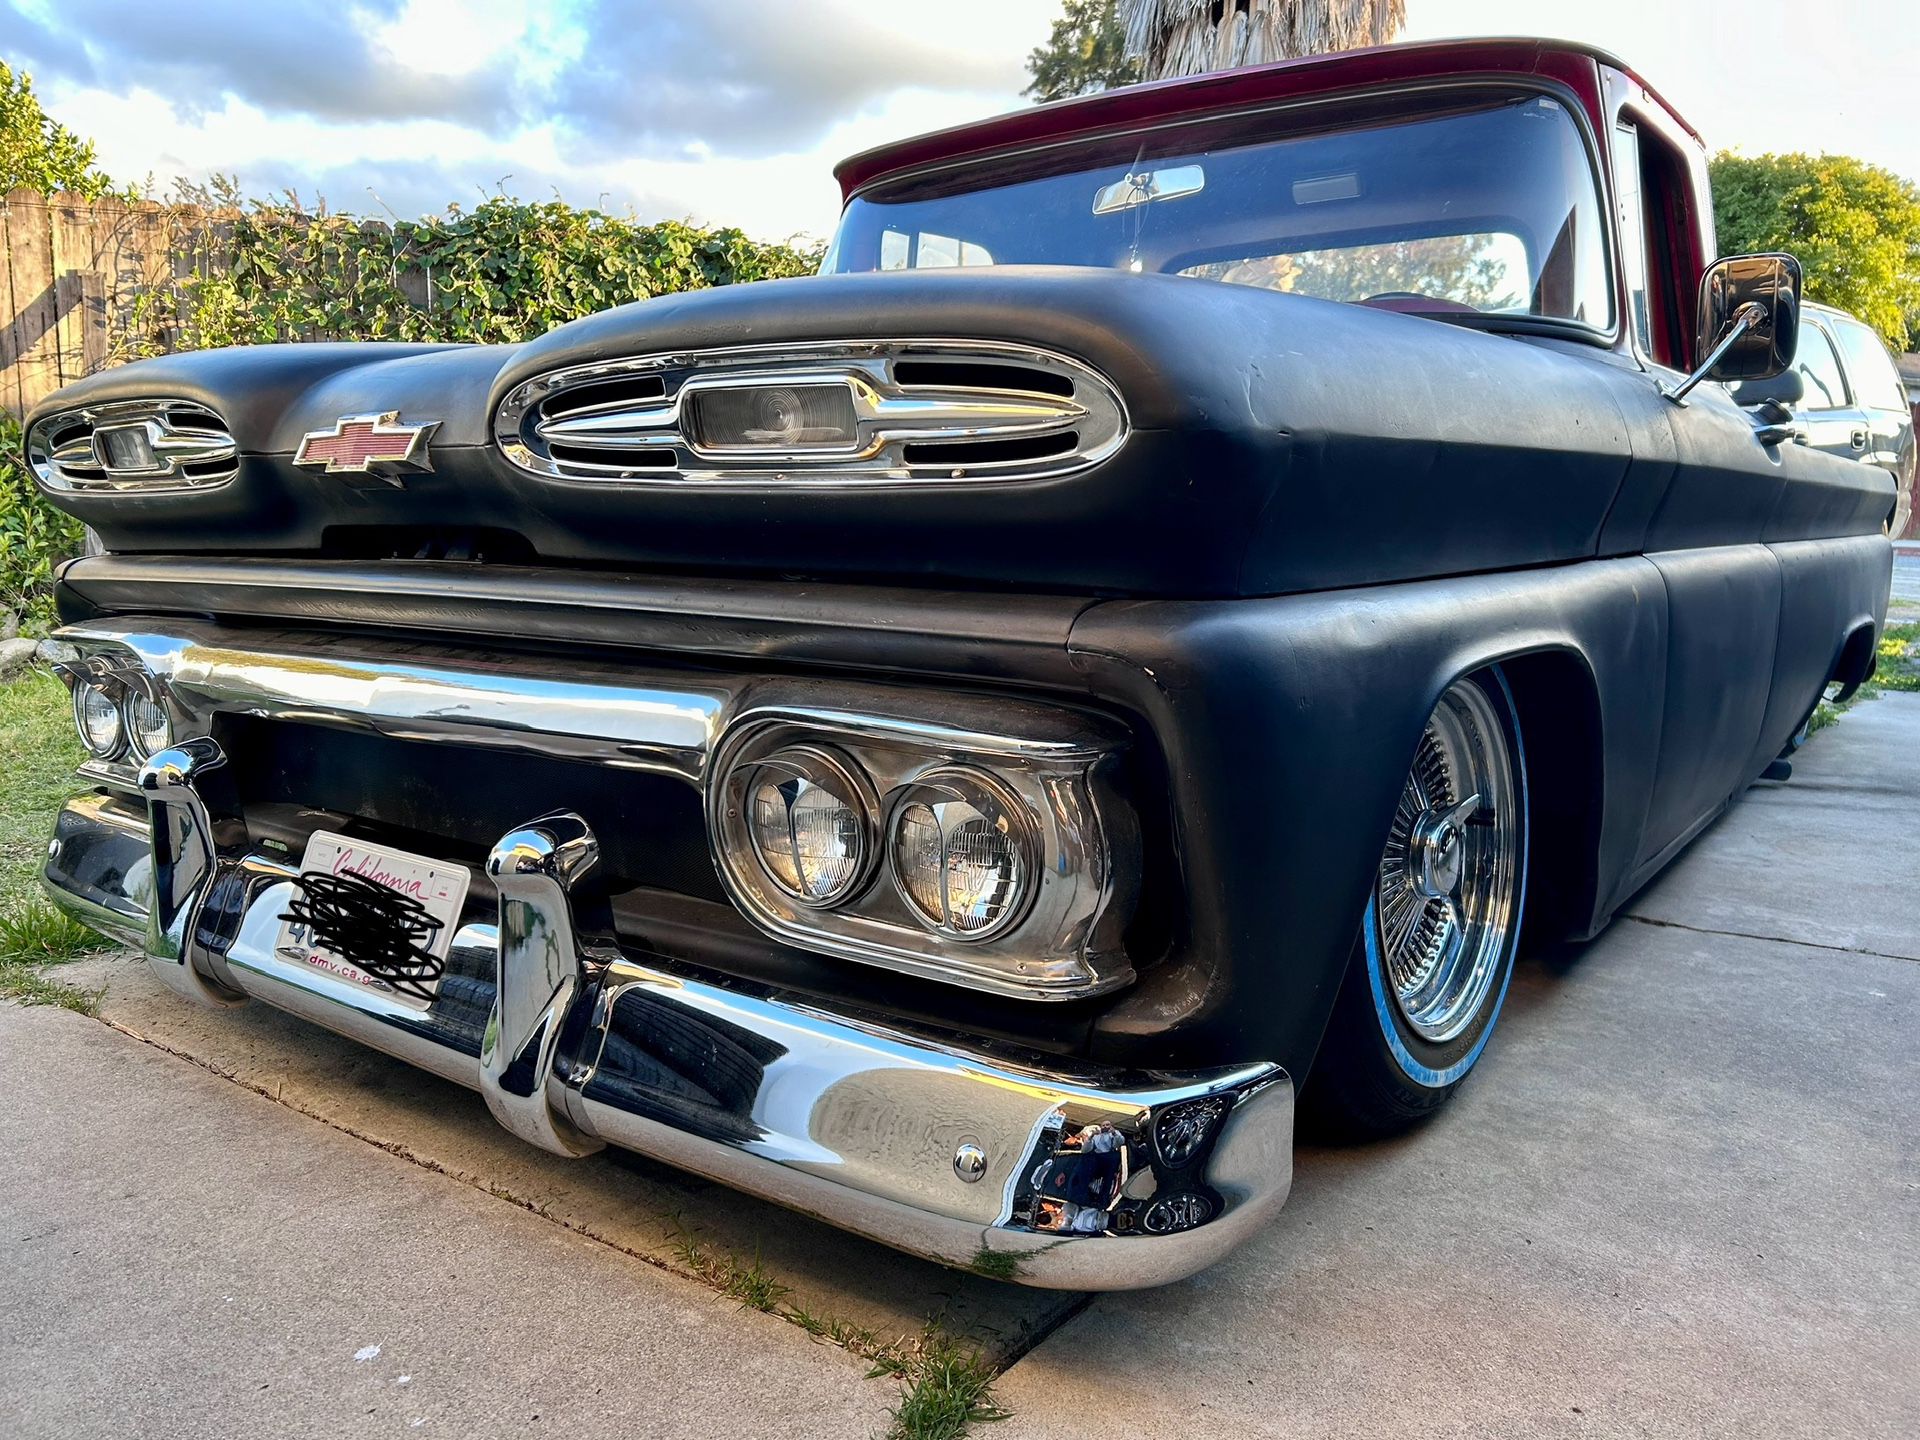 1963 Chevy C10 On Bags For Sale Or Trade